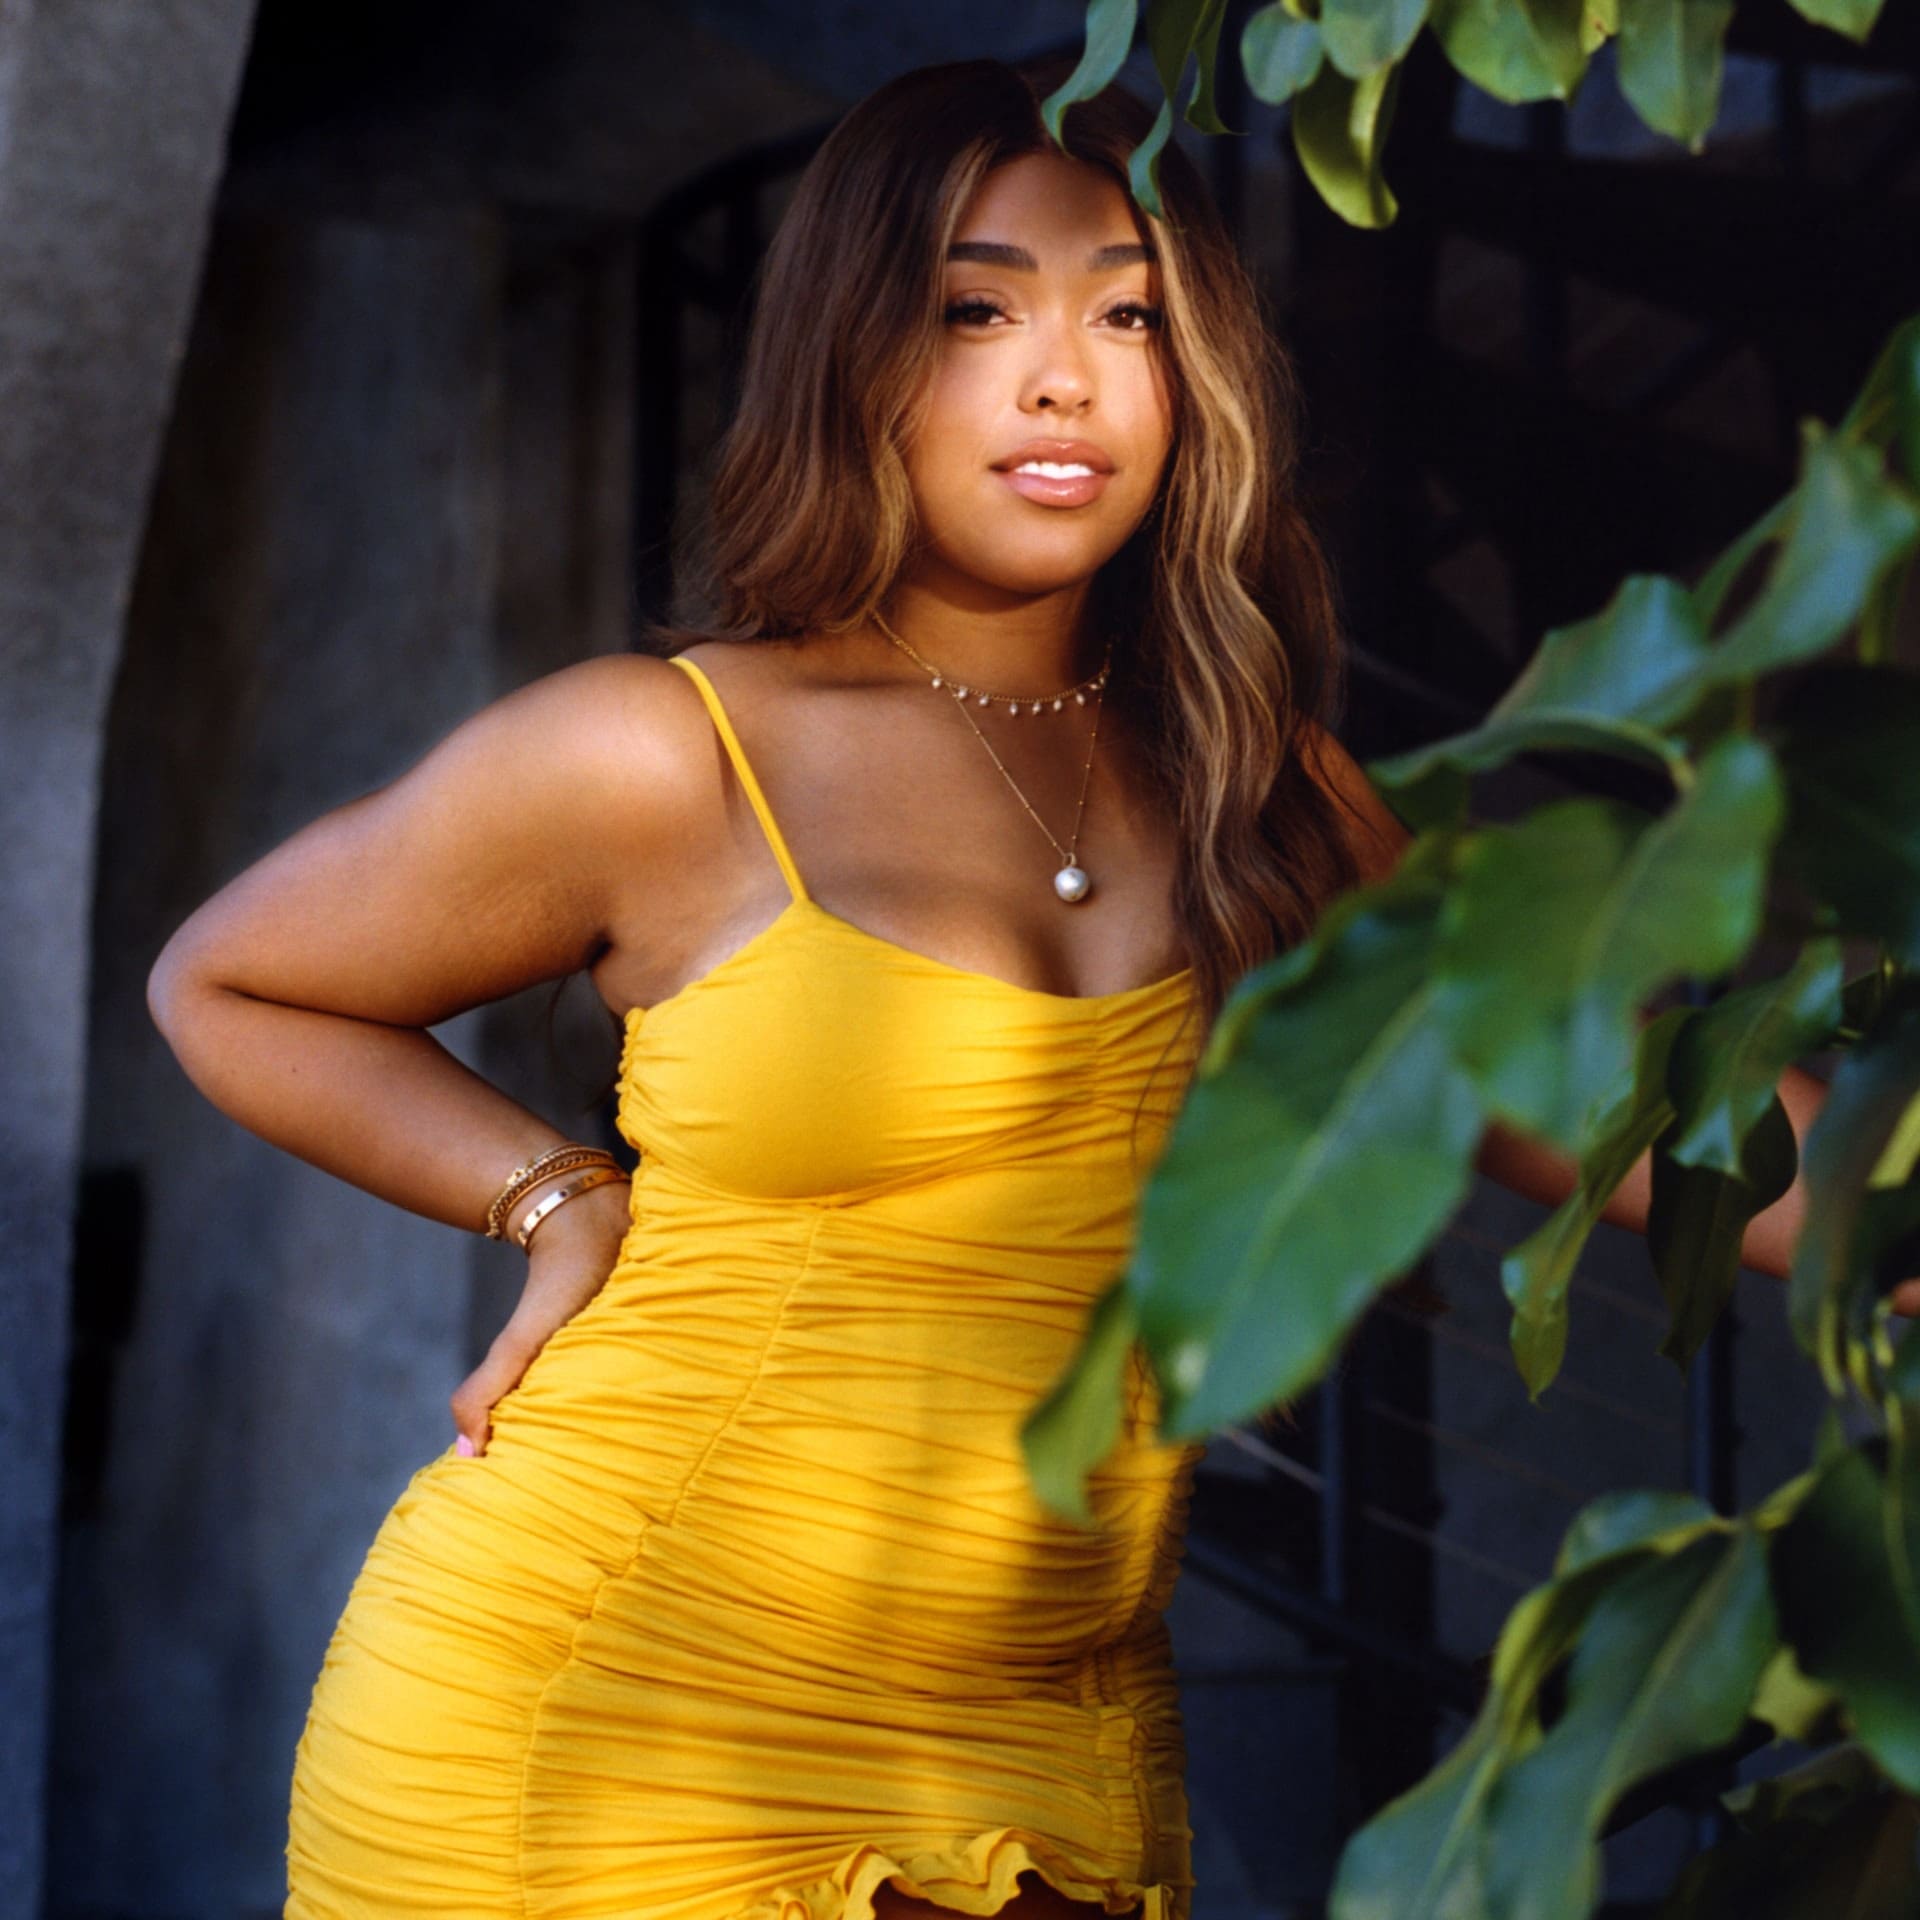 jordyn-woods-looks-for-magic-in-every-moment-check-her-out-flaunting-her-curves-in-this-gorgeous-dress